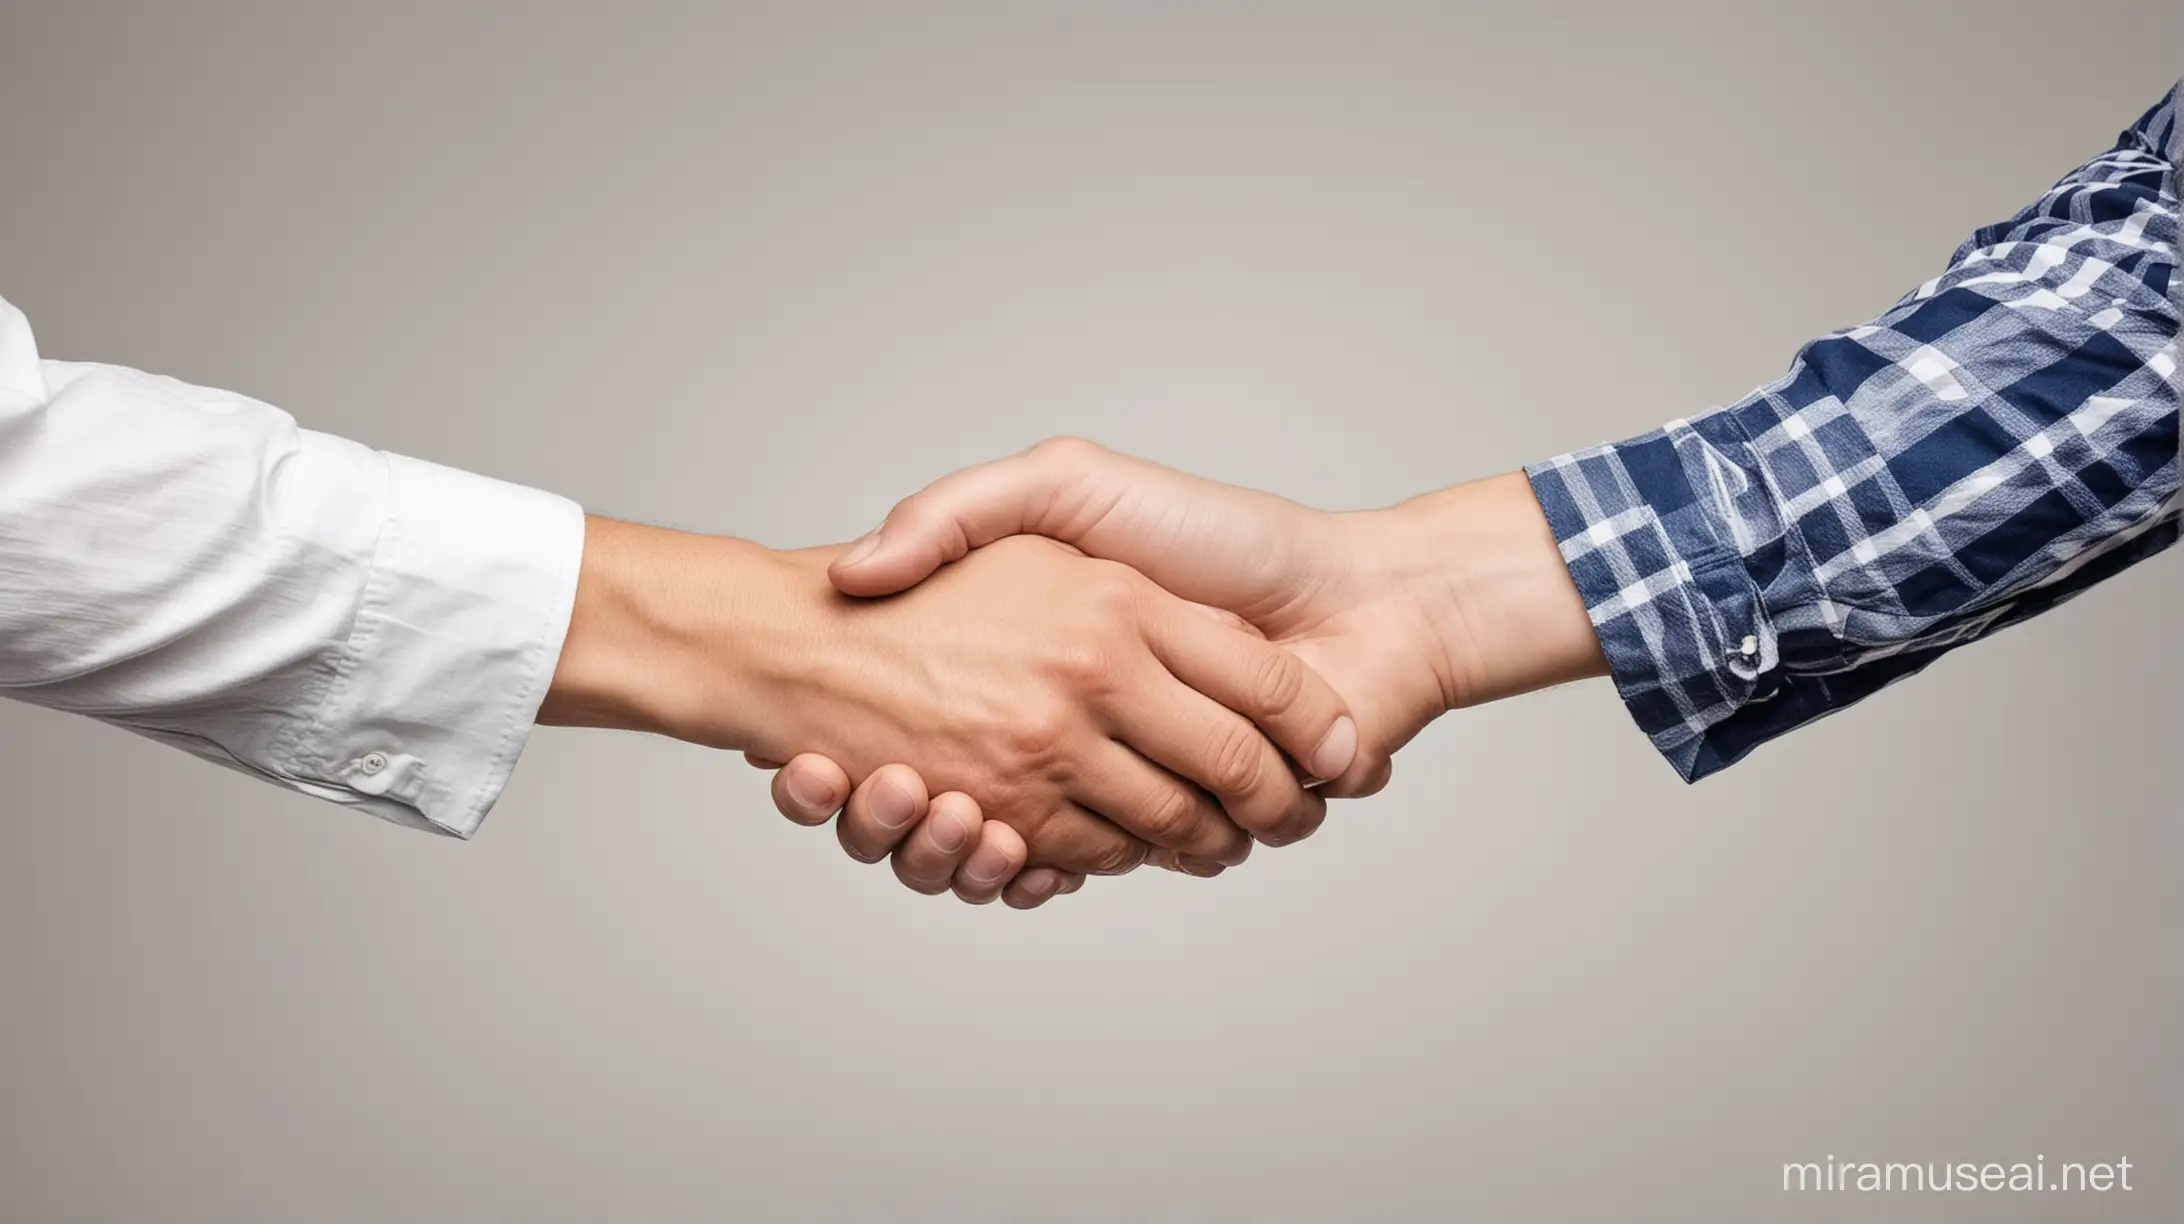 Generate an image where two hands (one is professional & One is farmer's) shaking the hands in plain white background